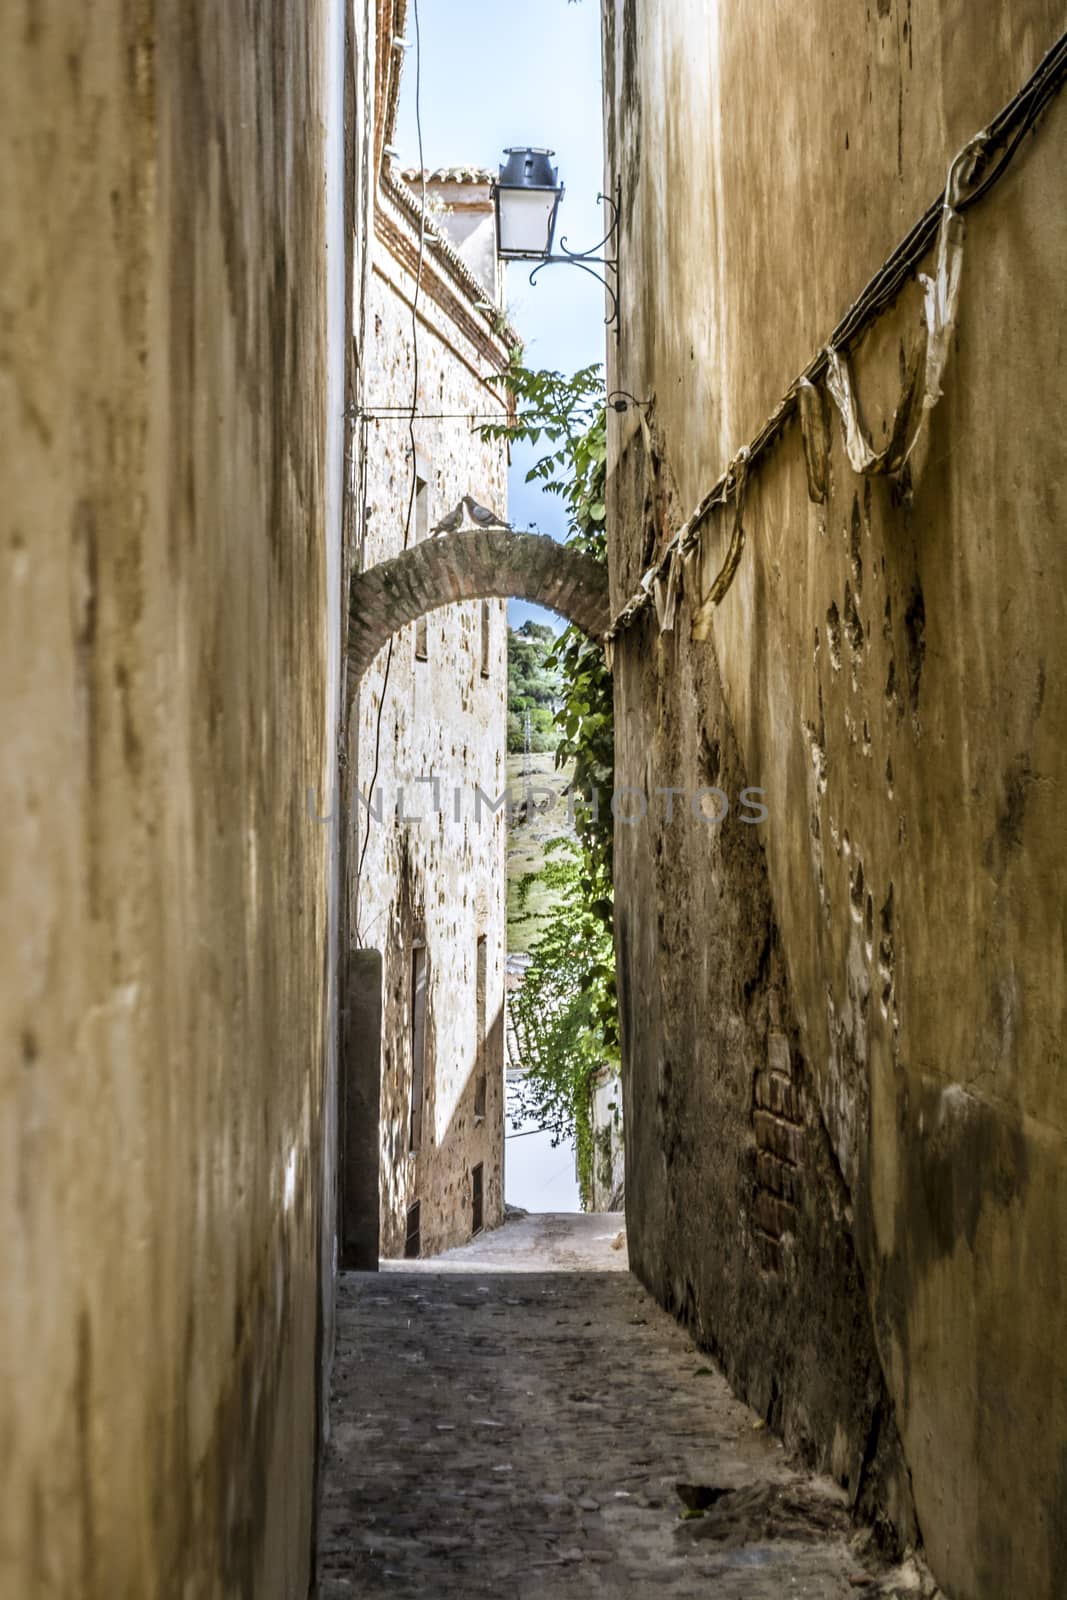 Narrow streets and alleys of the historical old town of Caceres, Extremadura, Spain. by kb79